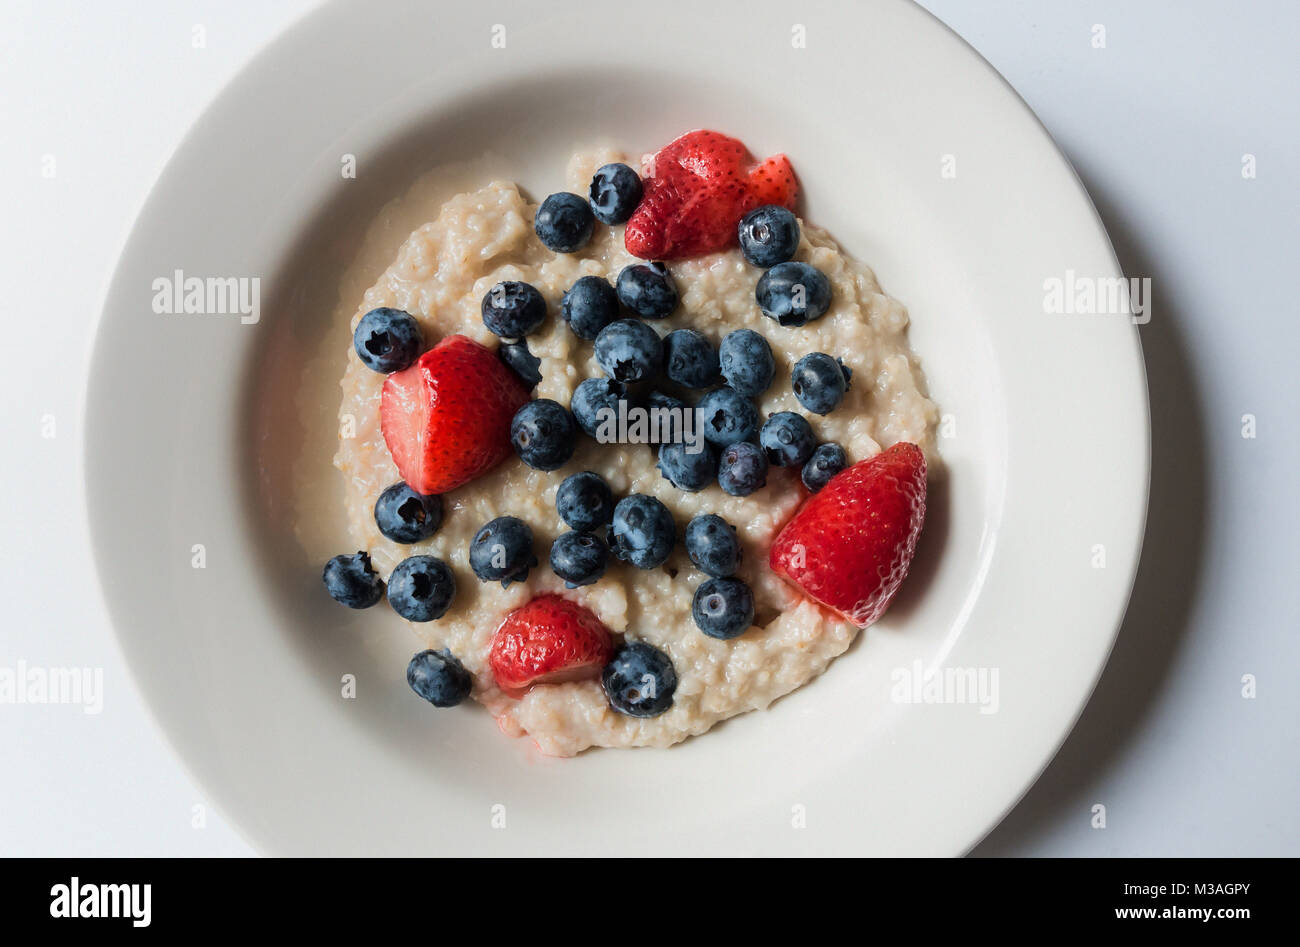 A bowl of porridge with blueberries and strawberries Stock Photo